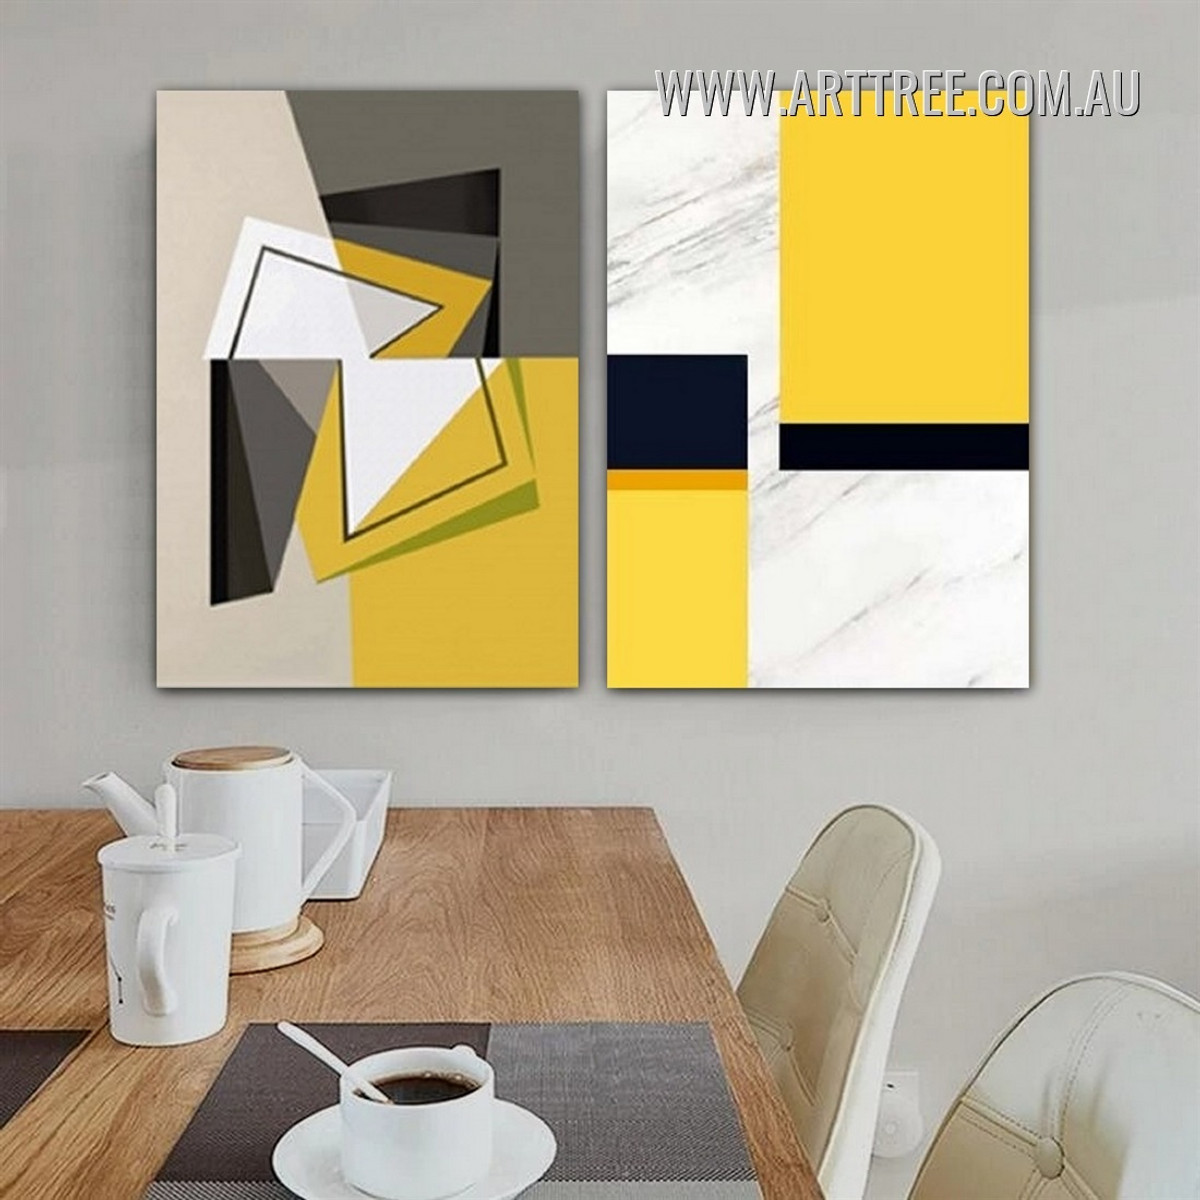 Hued Verse Tarnish Stretched Geometric Abstract Artwork Photo 2 Piece Modern Canvas Print for Room Wall Garnish